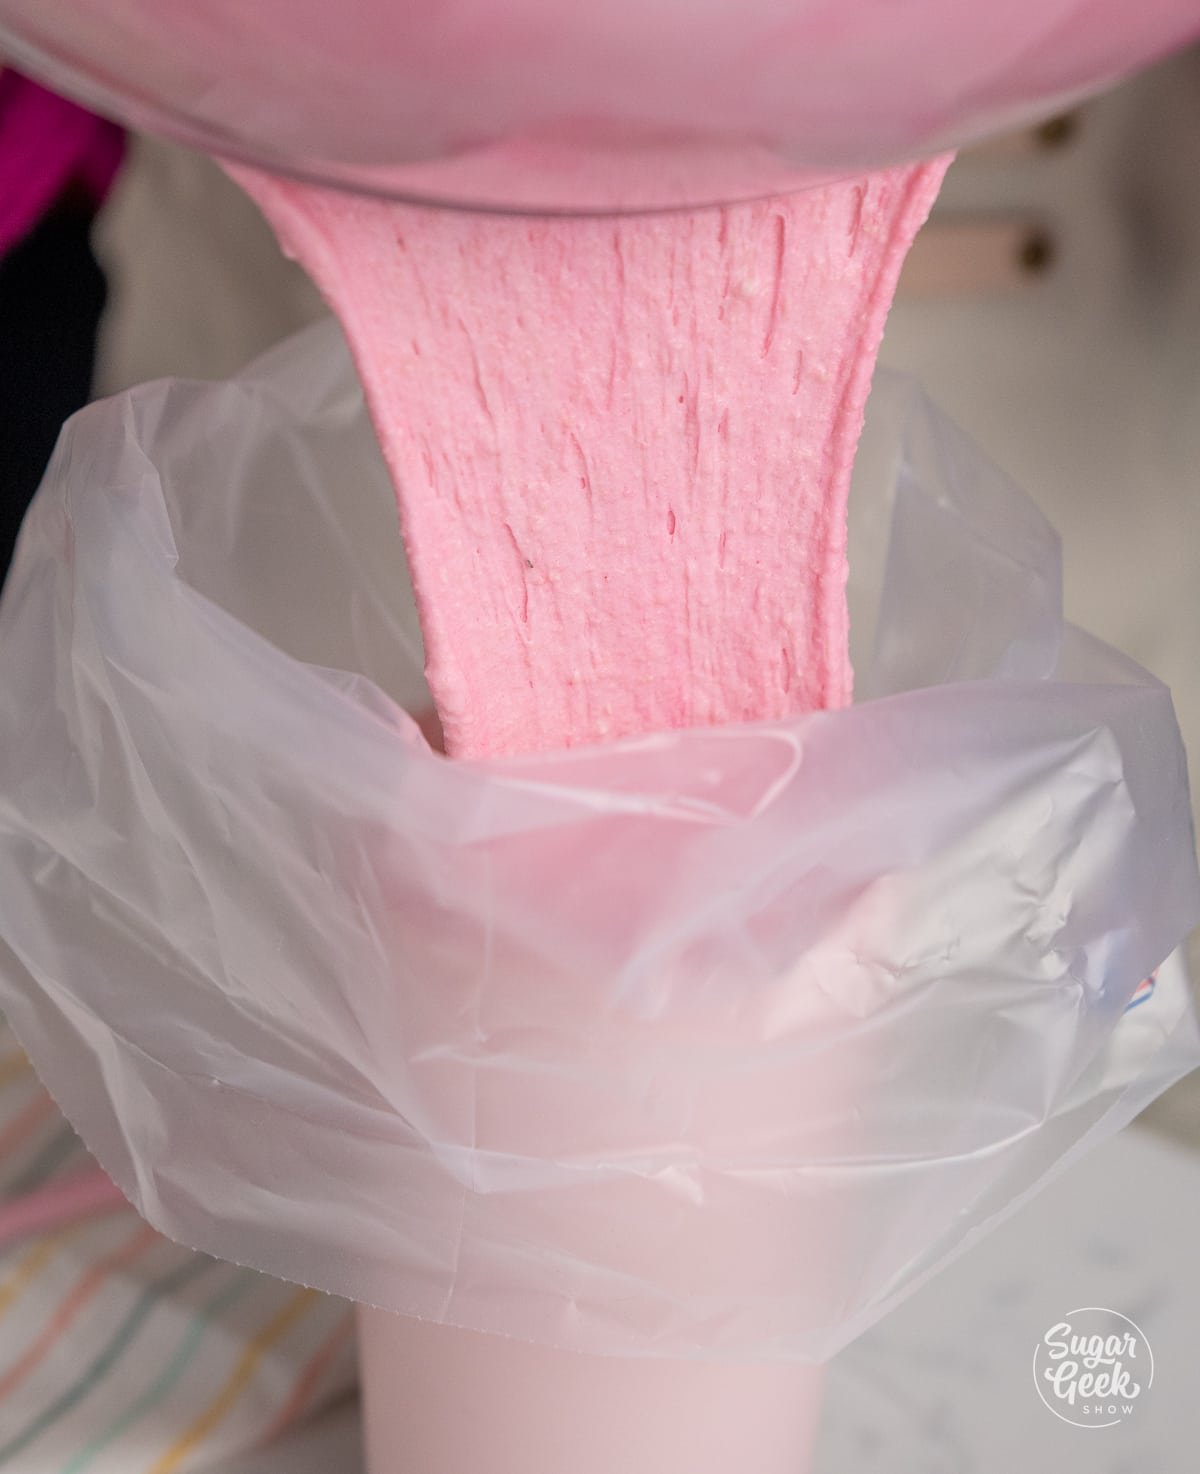 pouring pink macaron batter into a pastry bag